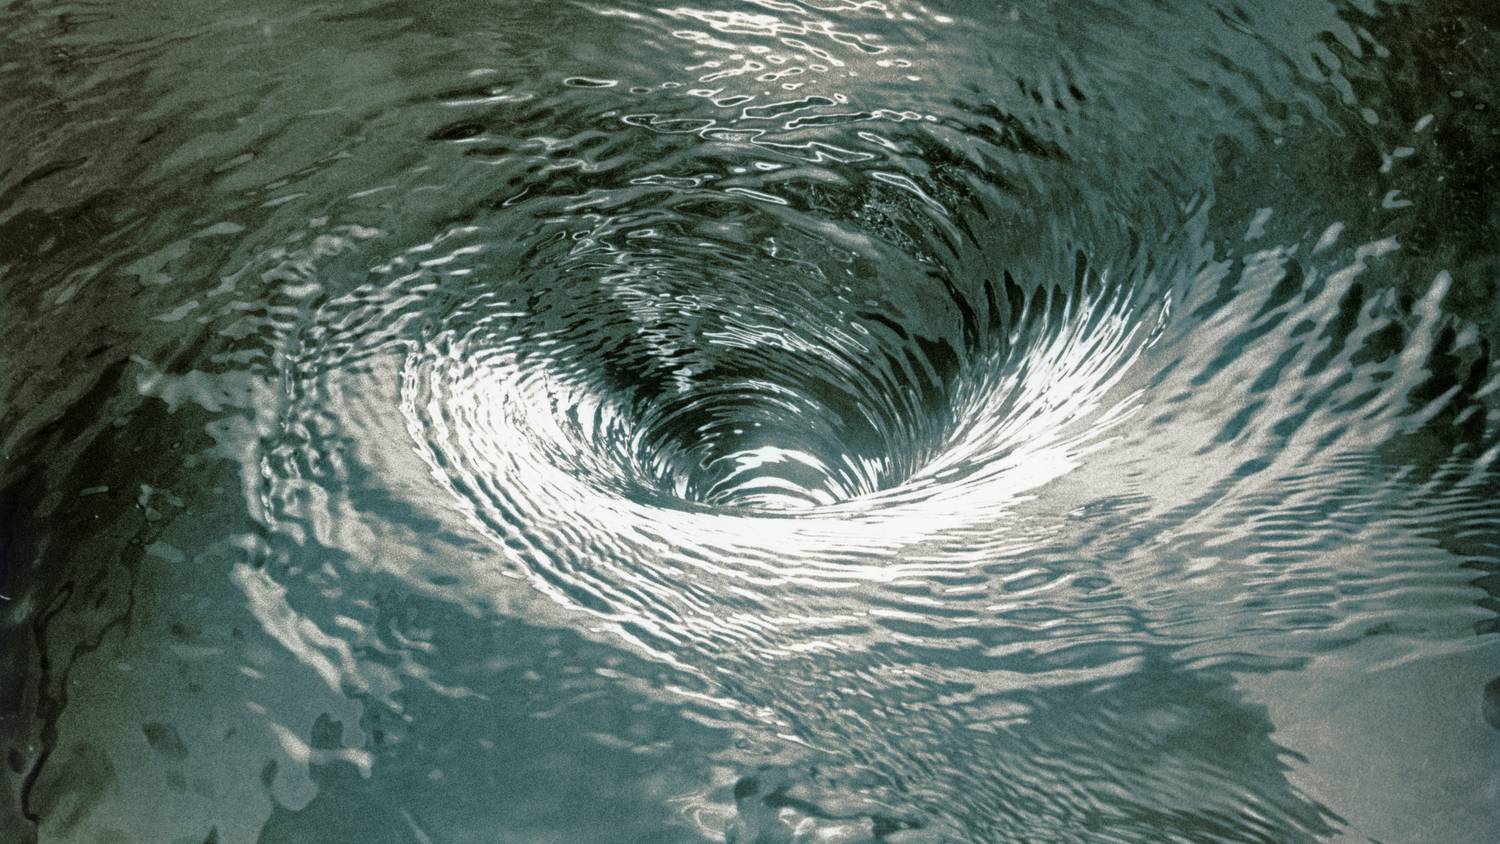 Velvet – Check-out – A terrifying video depicts a man being pulled into the depths by a vortex